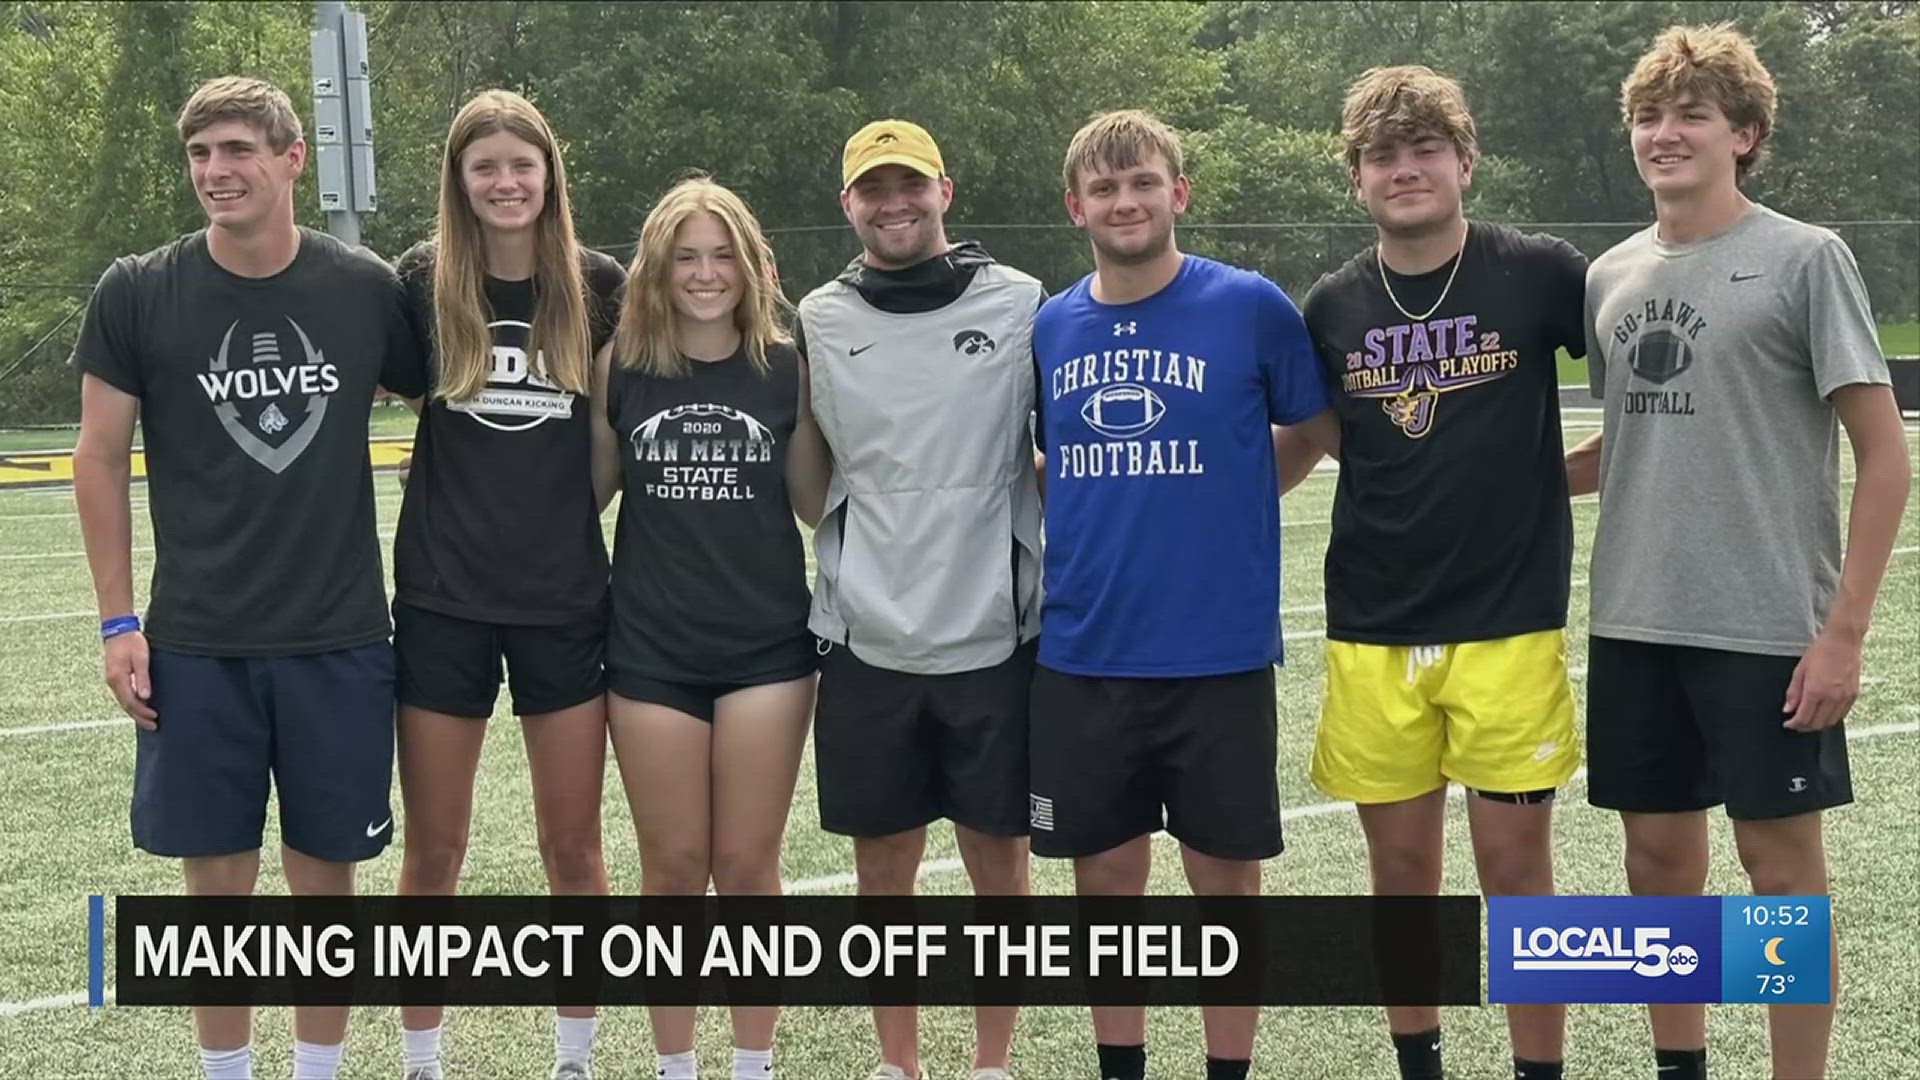 While Friday's DSM Christian and Van Meter matchup was the first time Katie Lindsay and Gianna Bennett met up on the football field, they are far from strangers.